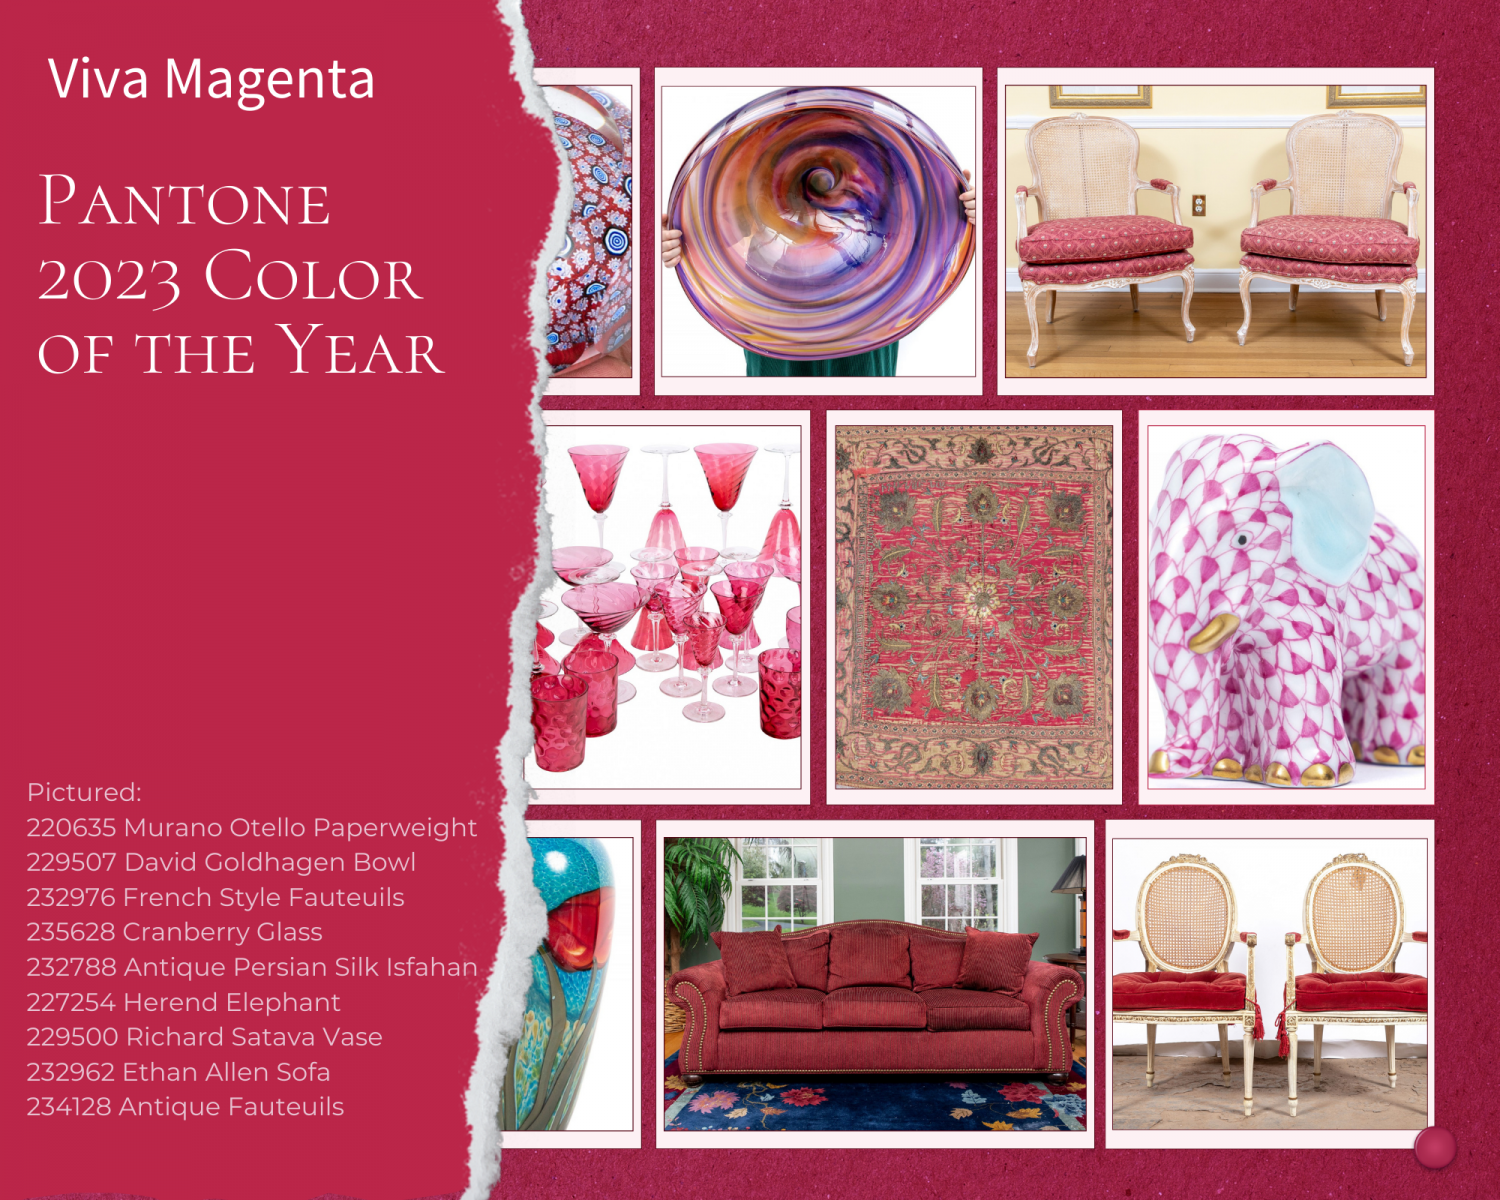 Some estate treasures inspired by Pantone’s 2023 color of the year … Viva Magenta